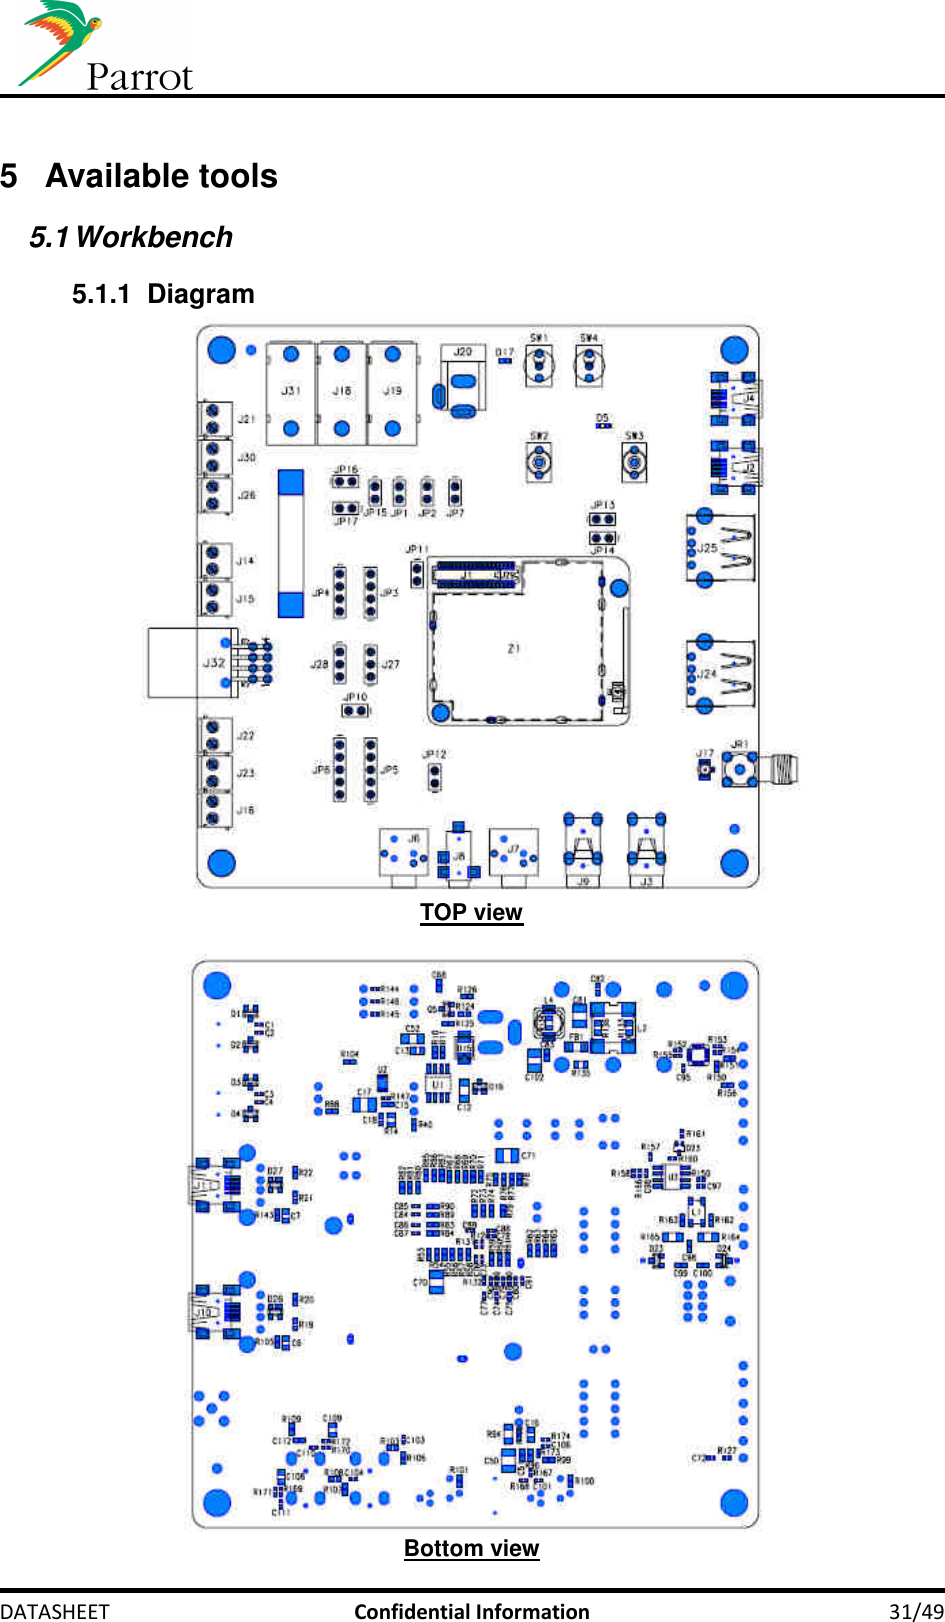     DATASHEET  Confidential Information  31/49  5  Available tools 5.1 Workbench 5.1.1  Diagram  TOP view   Bottom view 